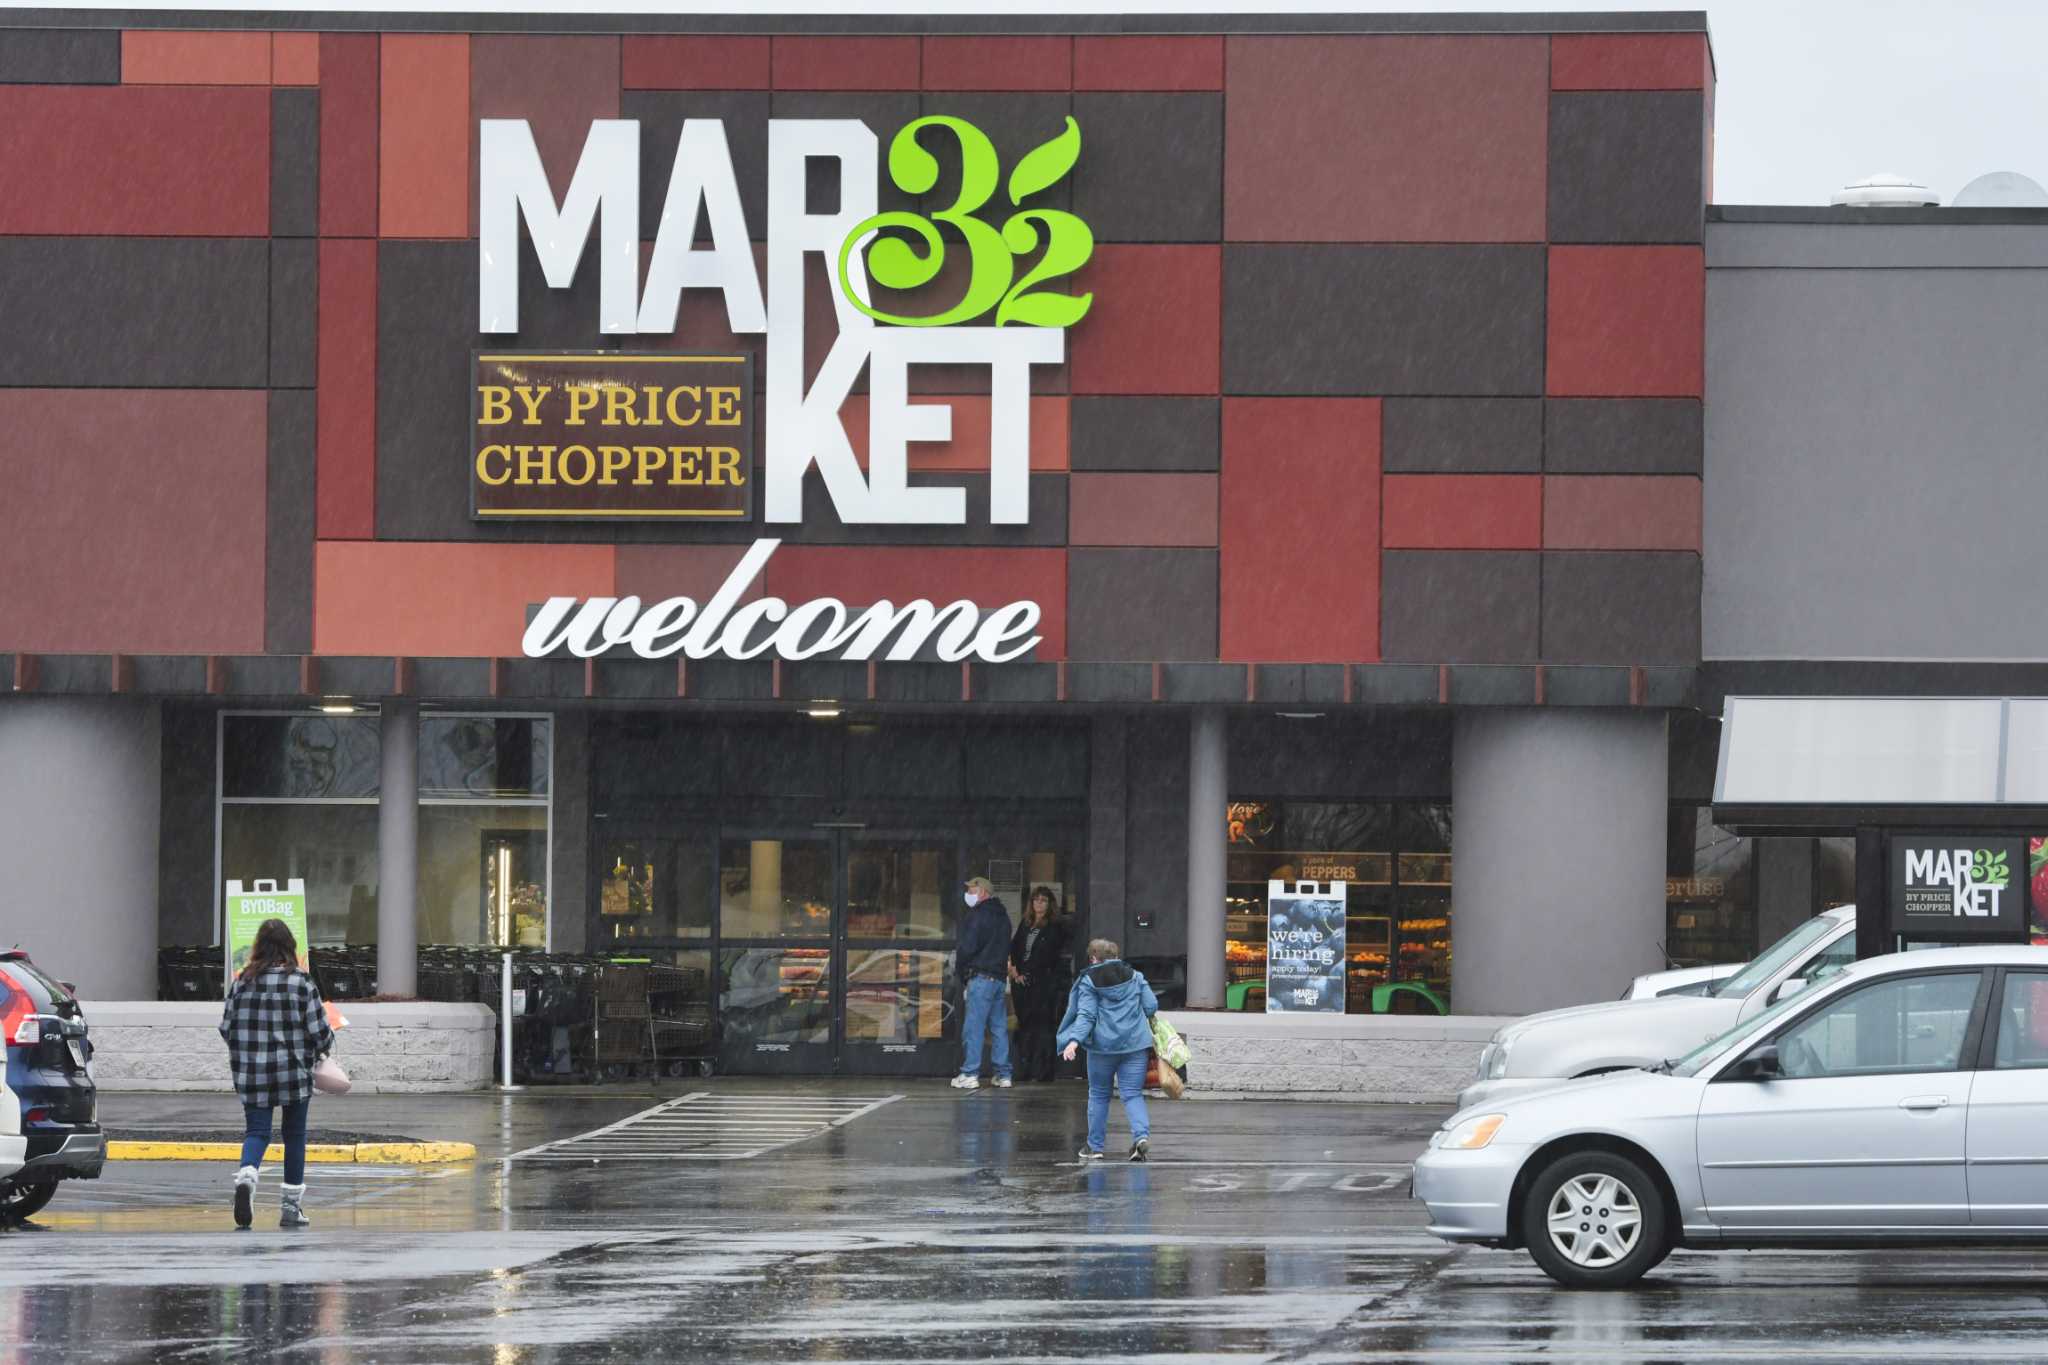 Gift Cards - Price Chopper - Market 32